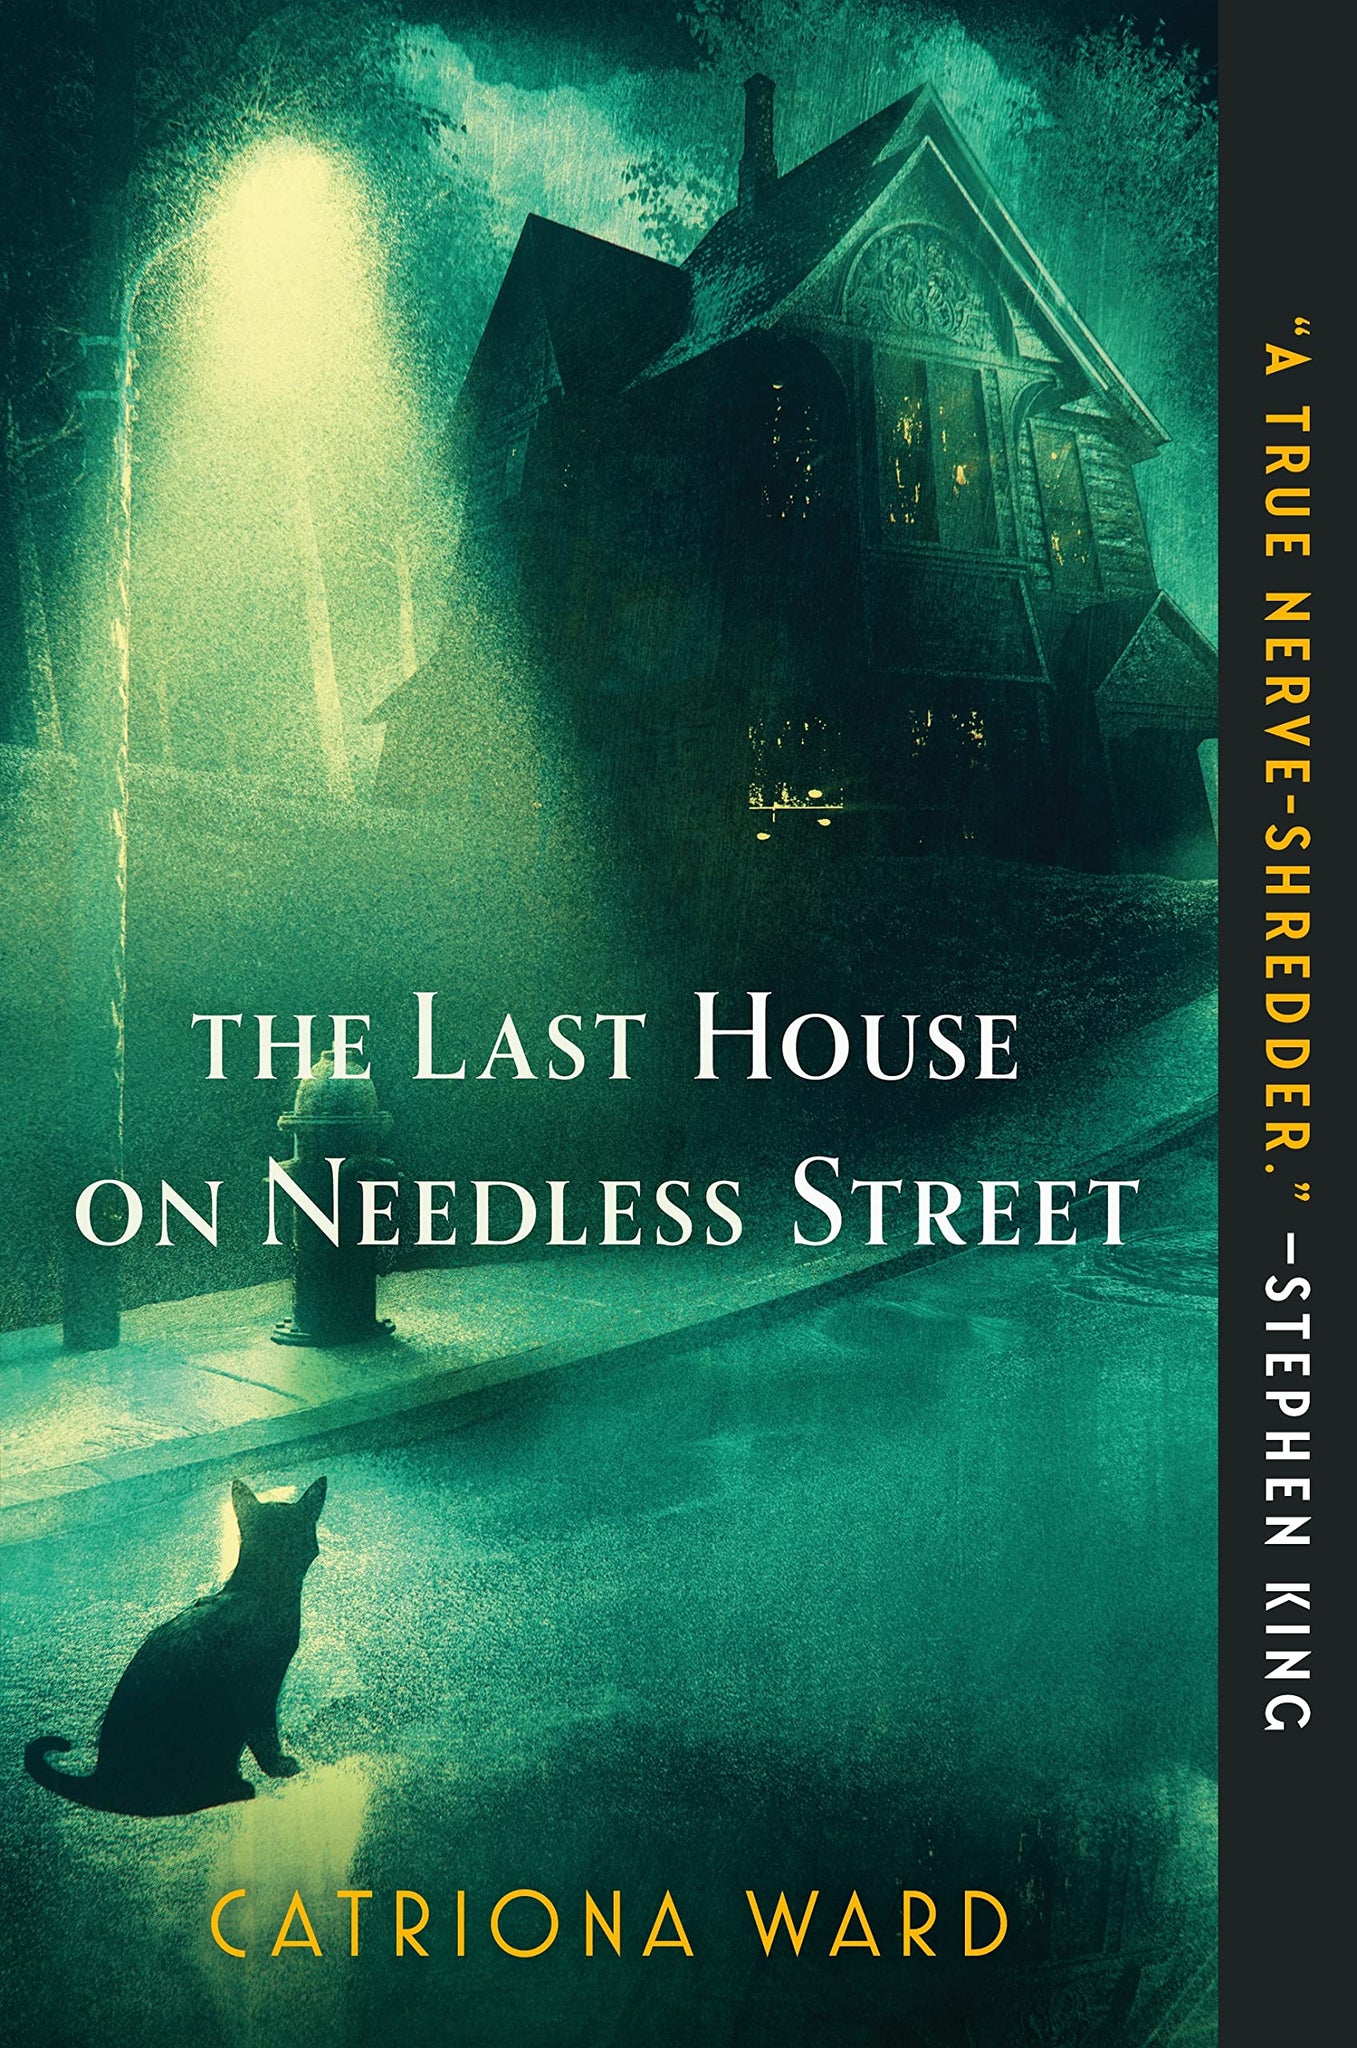 The Last House on Needless Street by Catriona Ward - tpbk